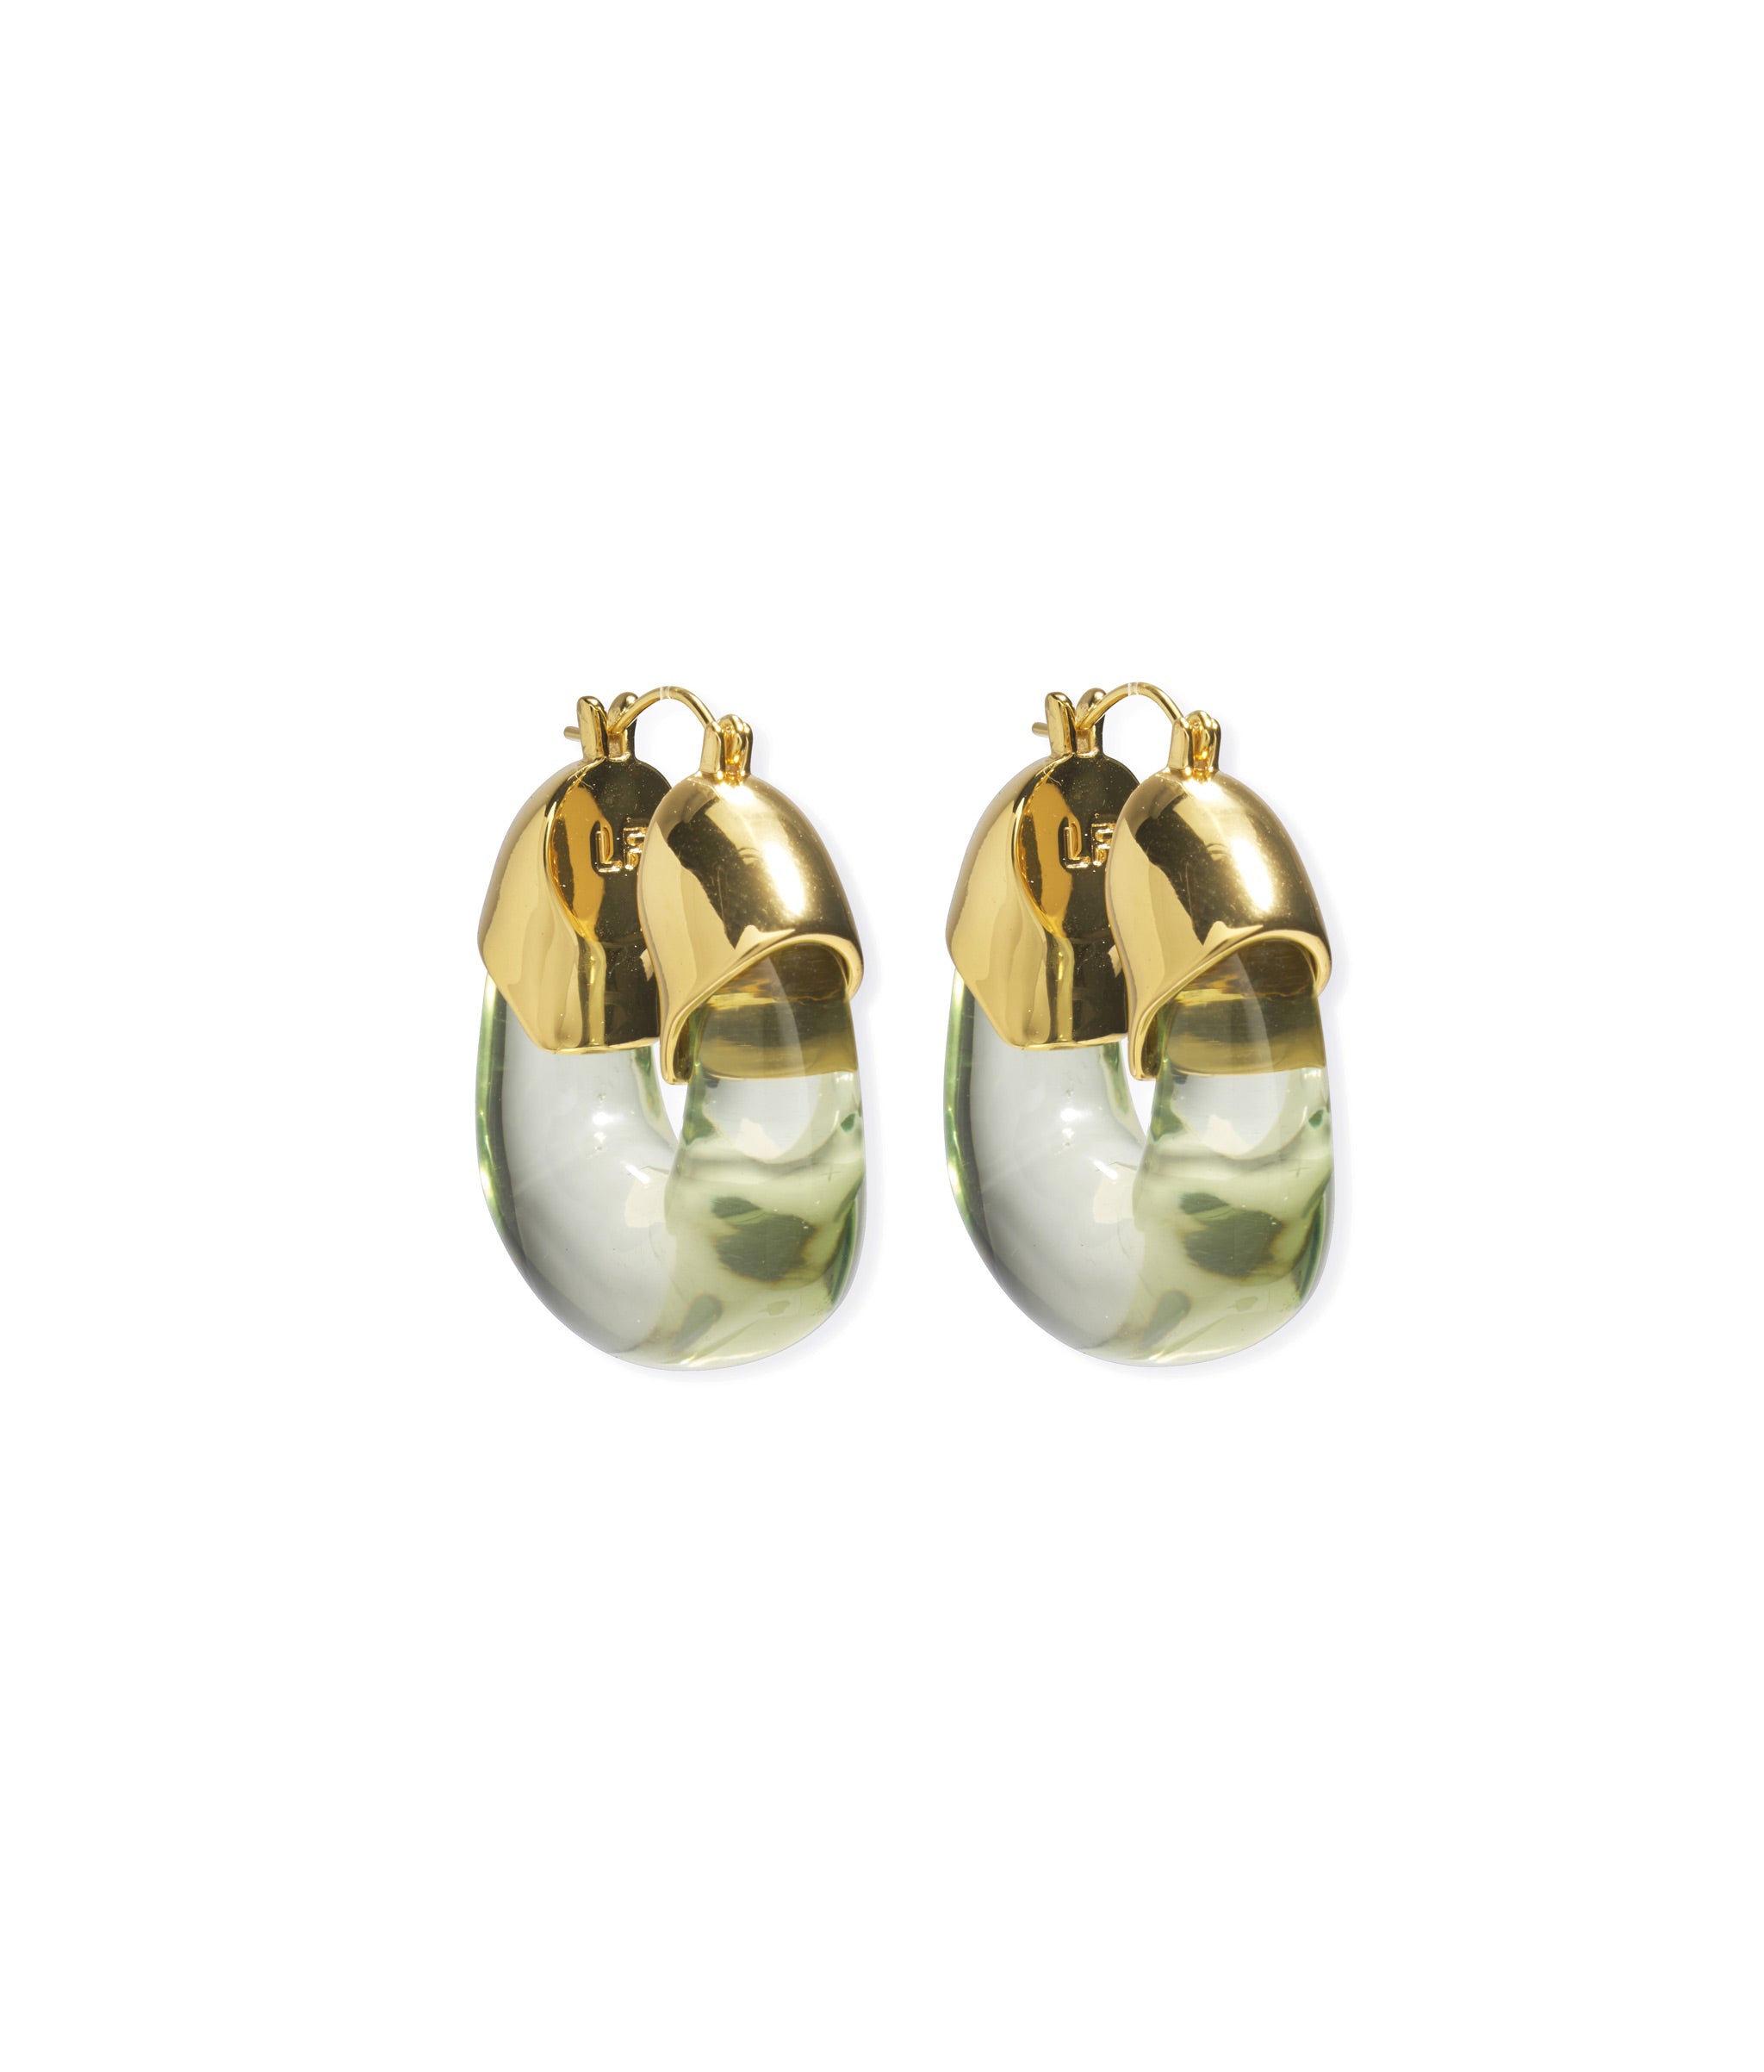 Organic Hoops in Lime. Gold-plated hoop earrings with transparent lime-colored resin.